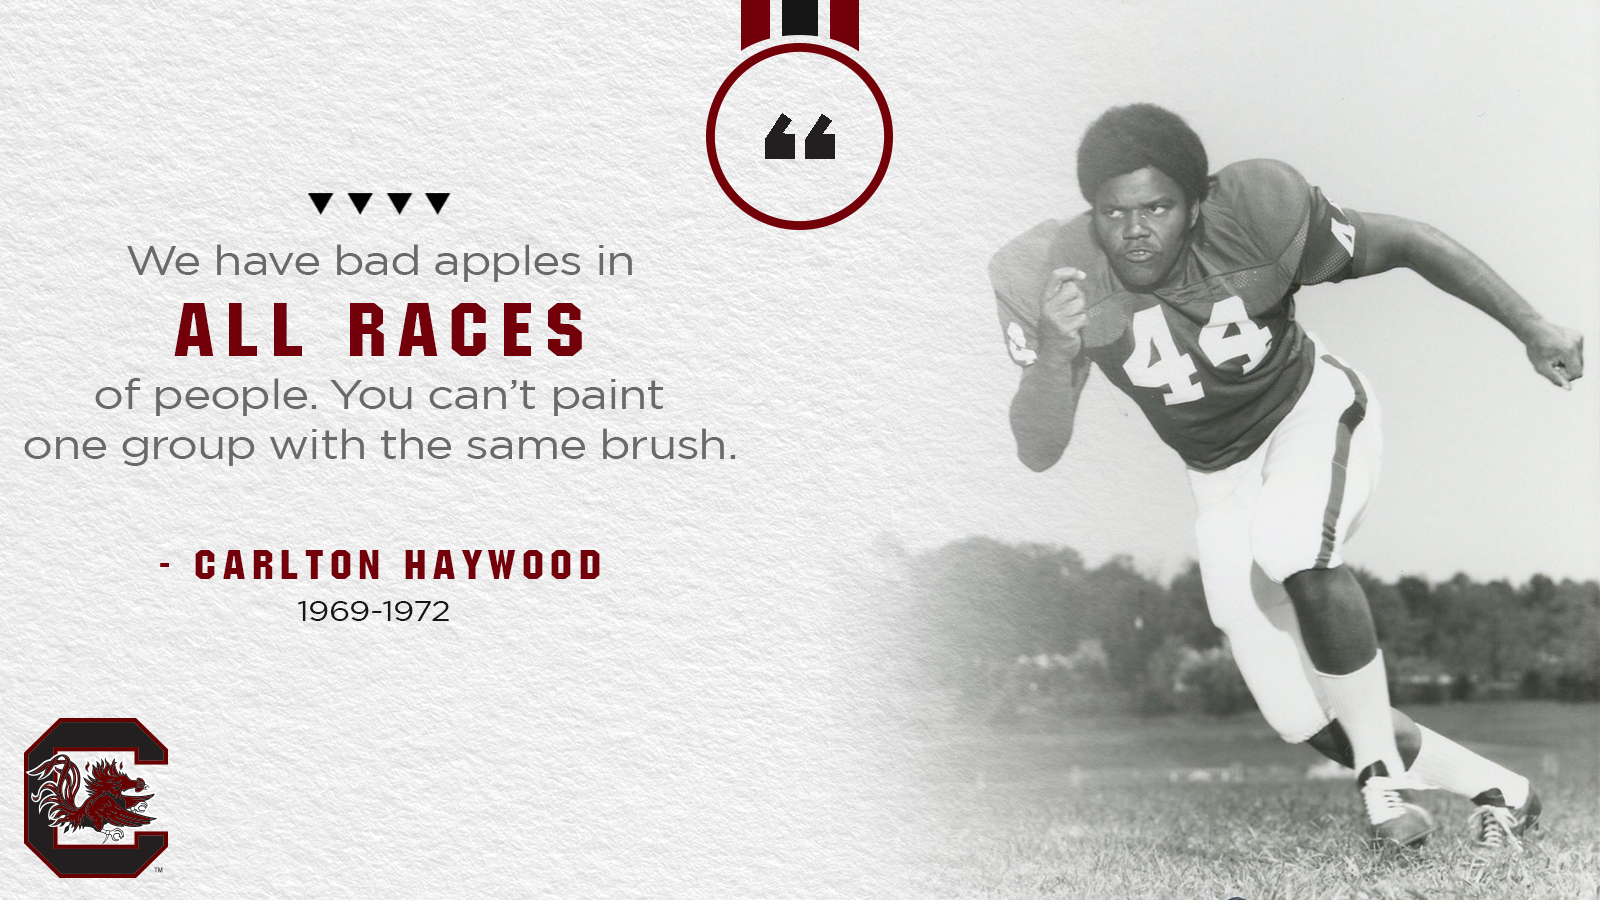 Football pioneer Carlton Haywood reflects on his place in Gamecock history